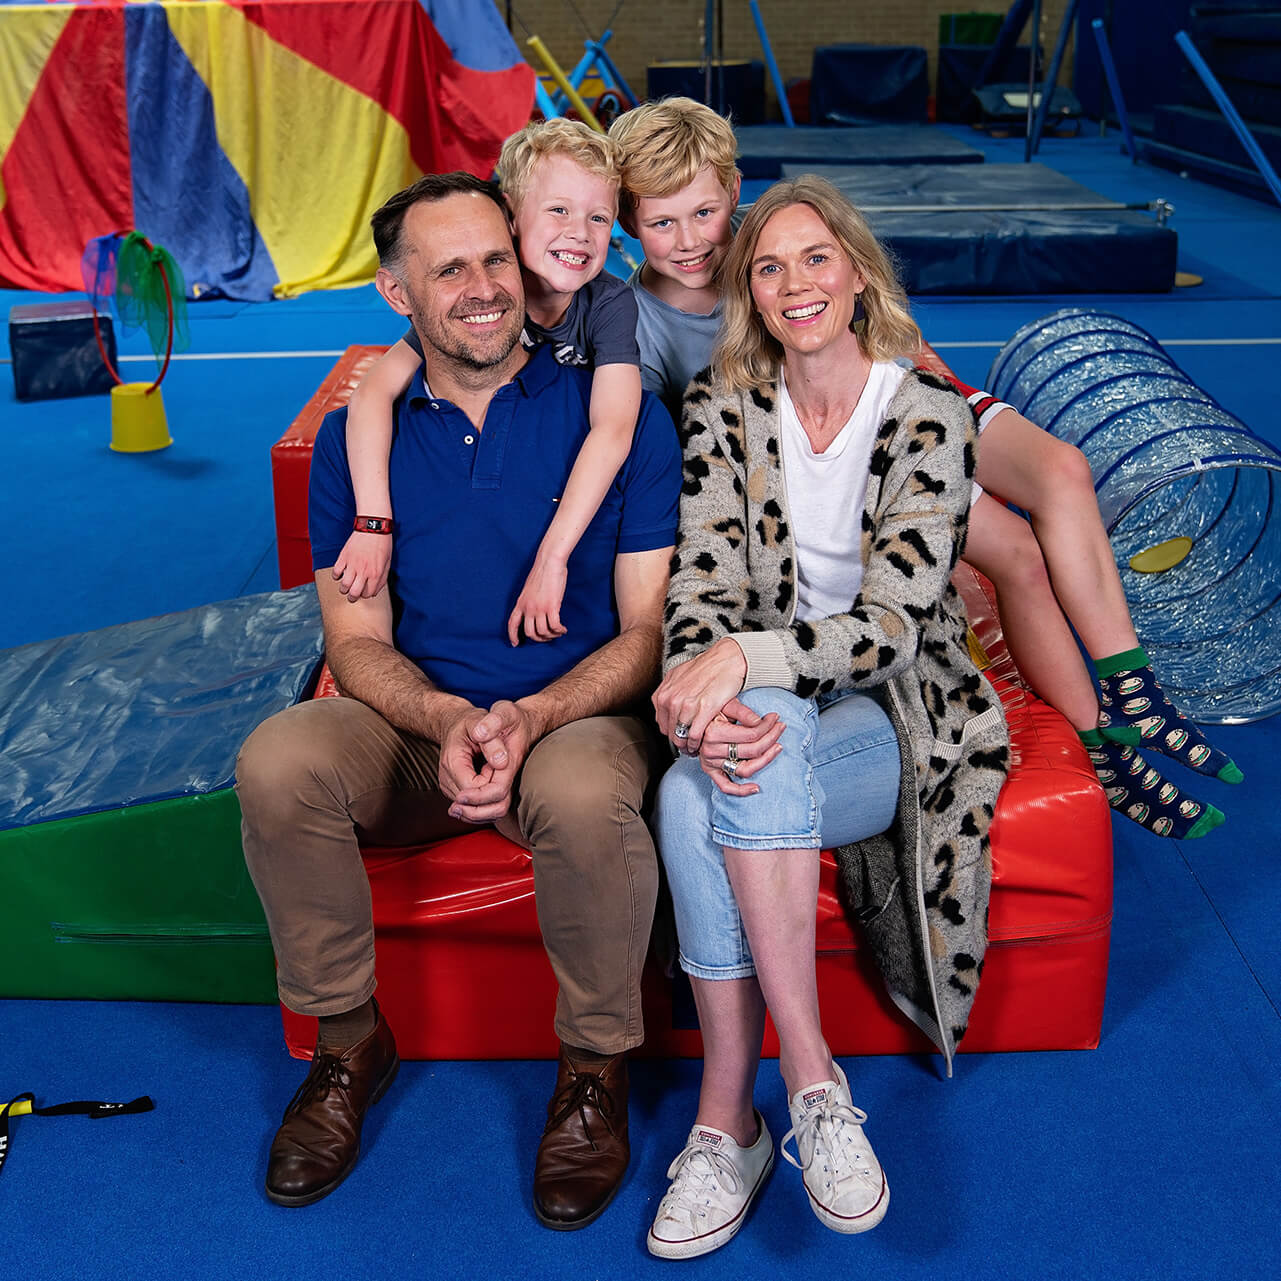 A family who attend KinderGym sitting together and smiling